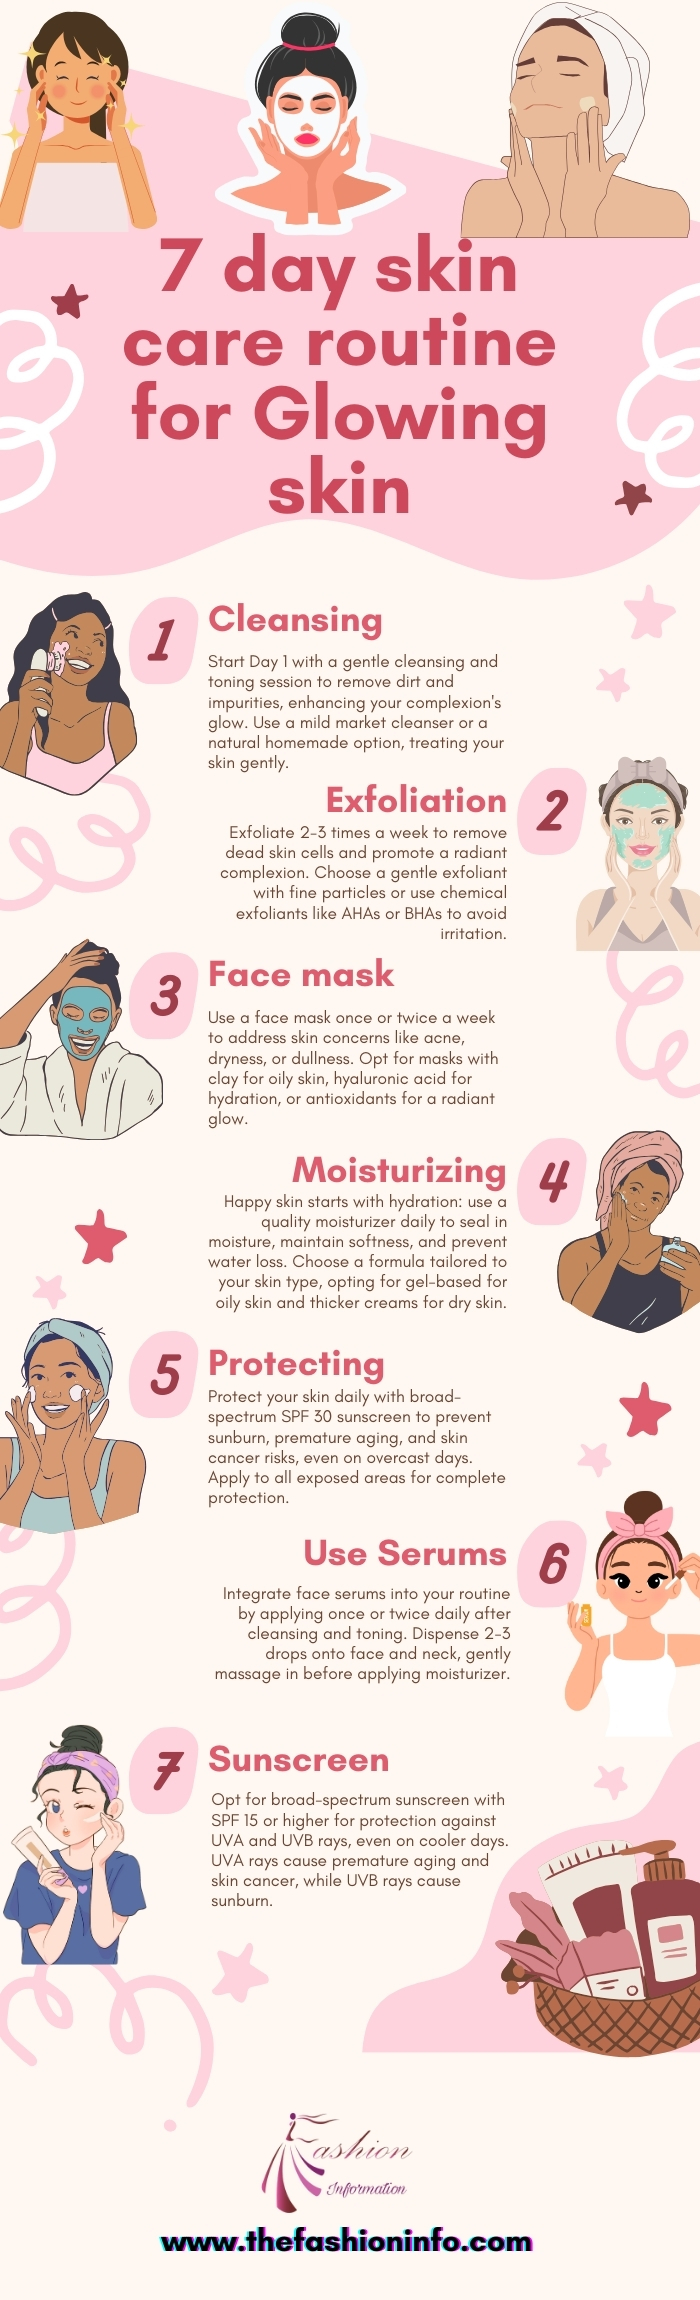 7 day kin care routine for Glowing skin